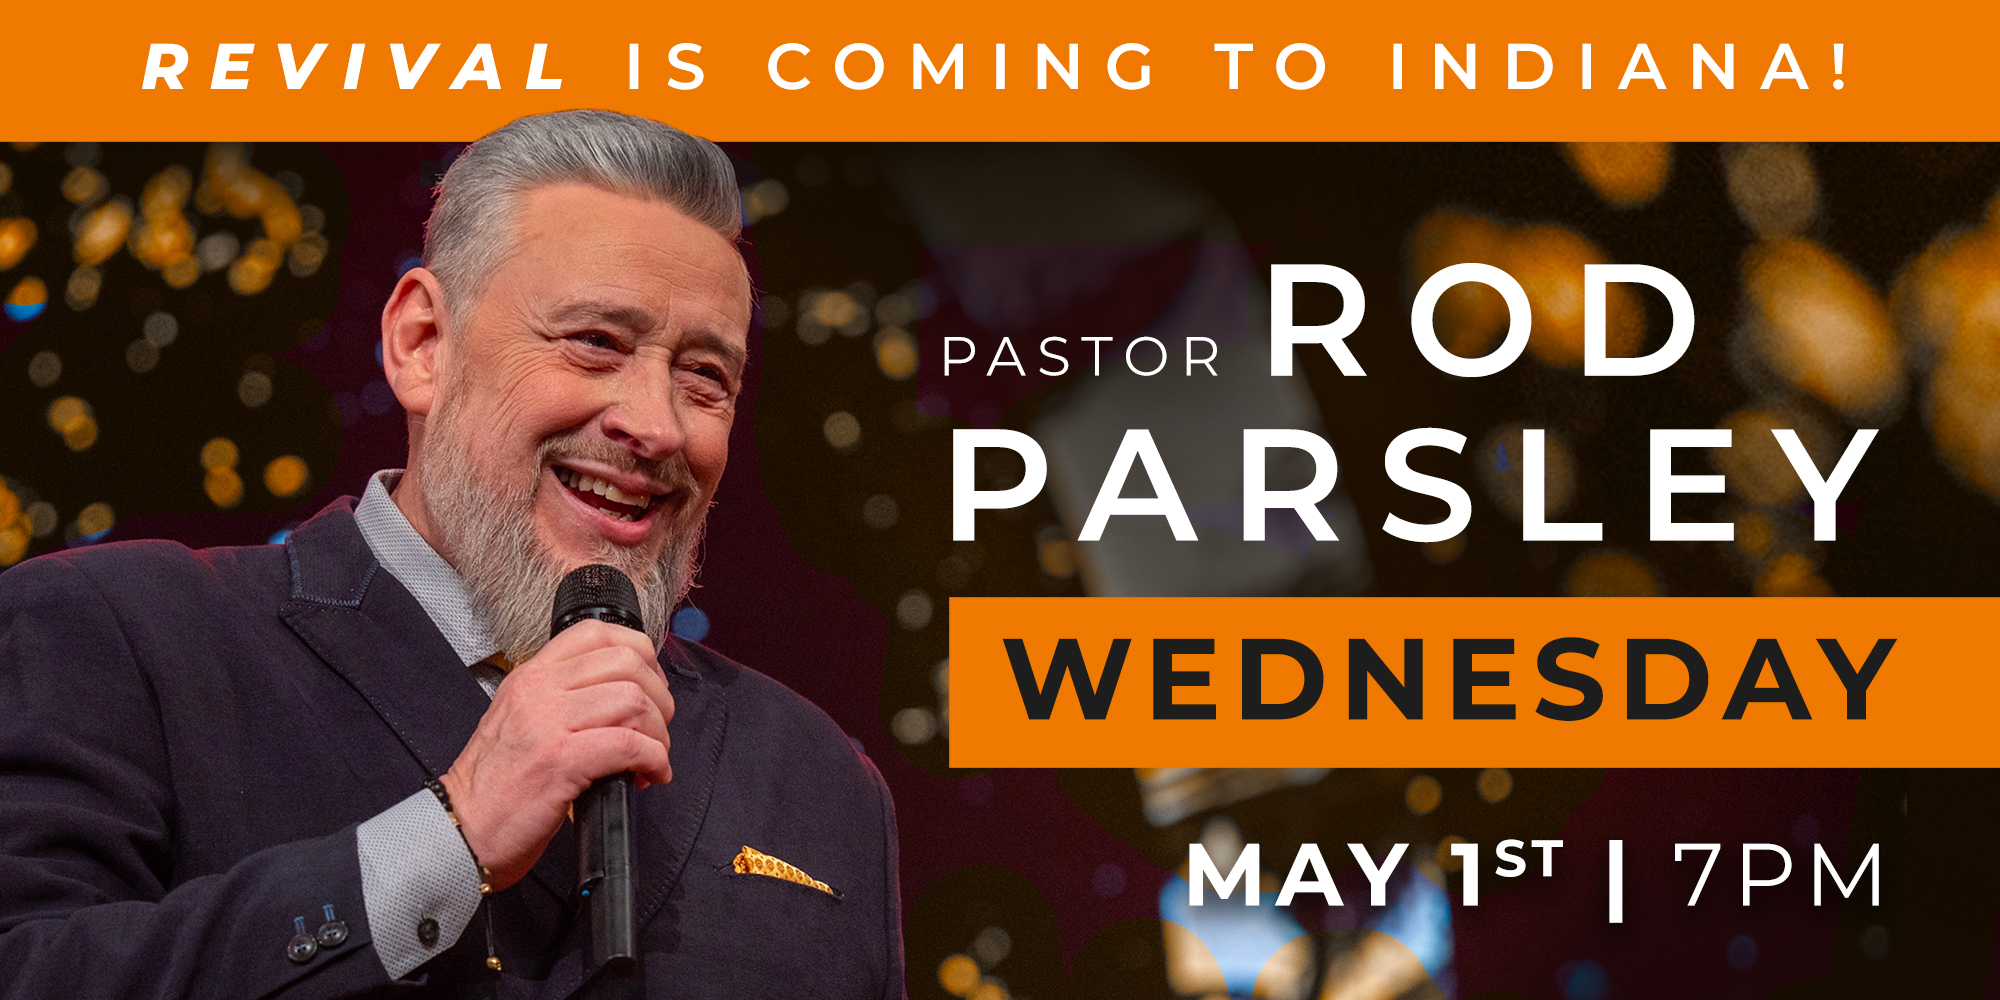 Revival is Coming to Indiana! Pastor Rod Parsley Wednesday May 1st | 7pm